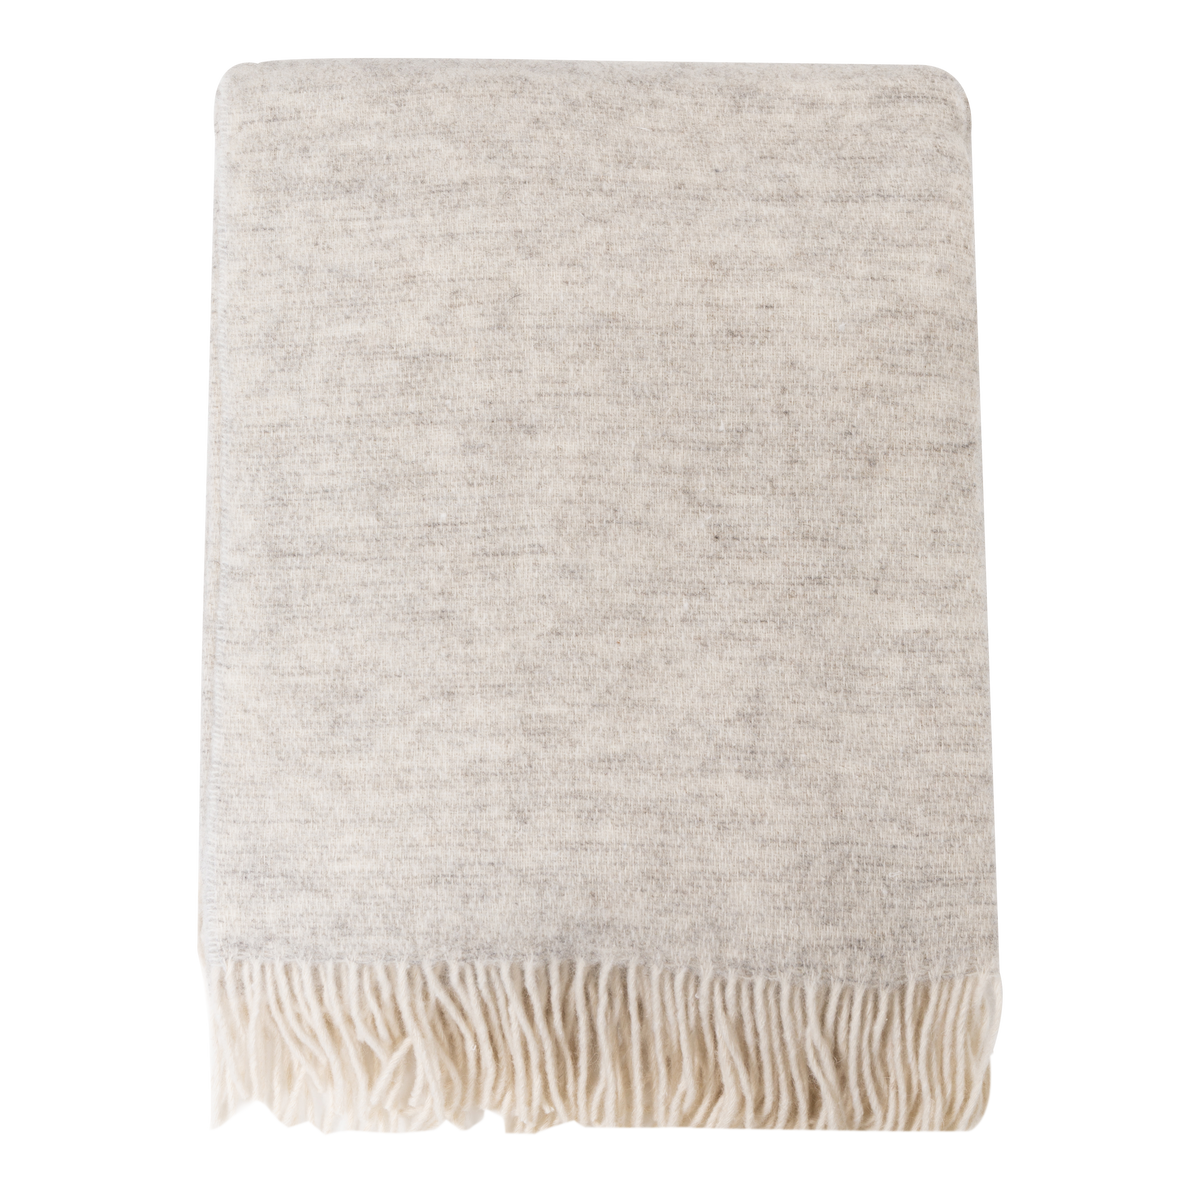 With a welcoming sense of comfort, The Double Sided Throw is exclusively woven with wool from New Zealand.